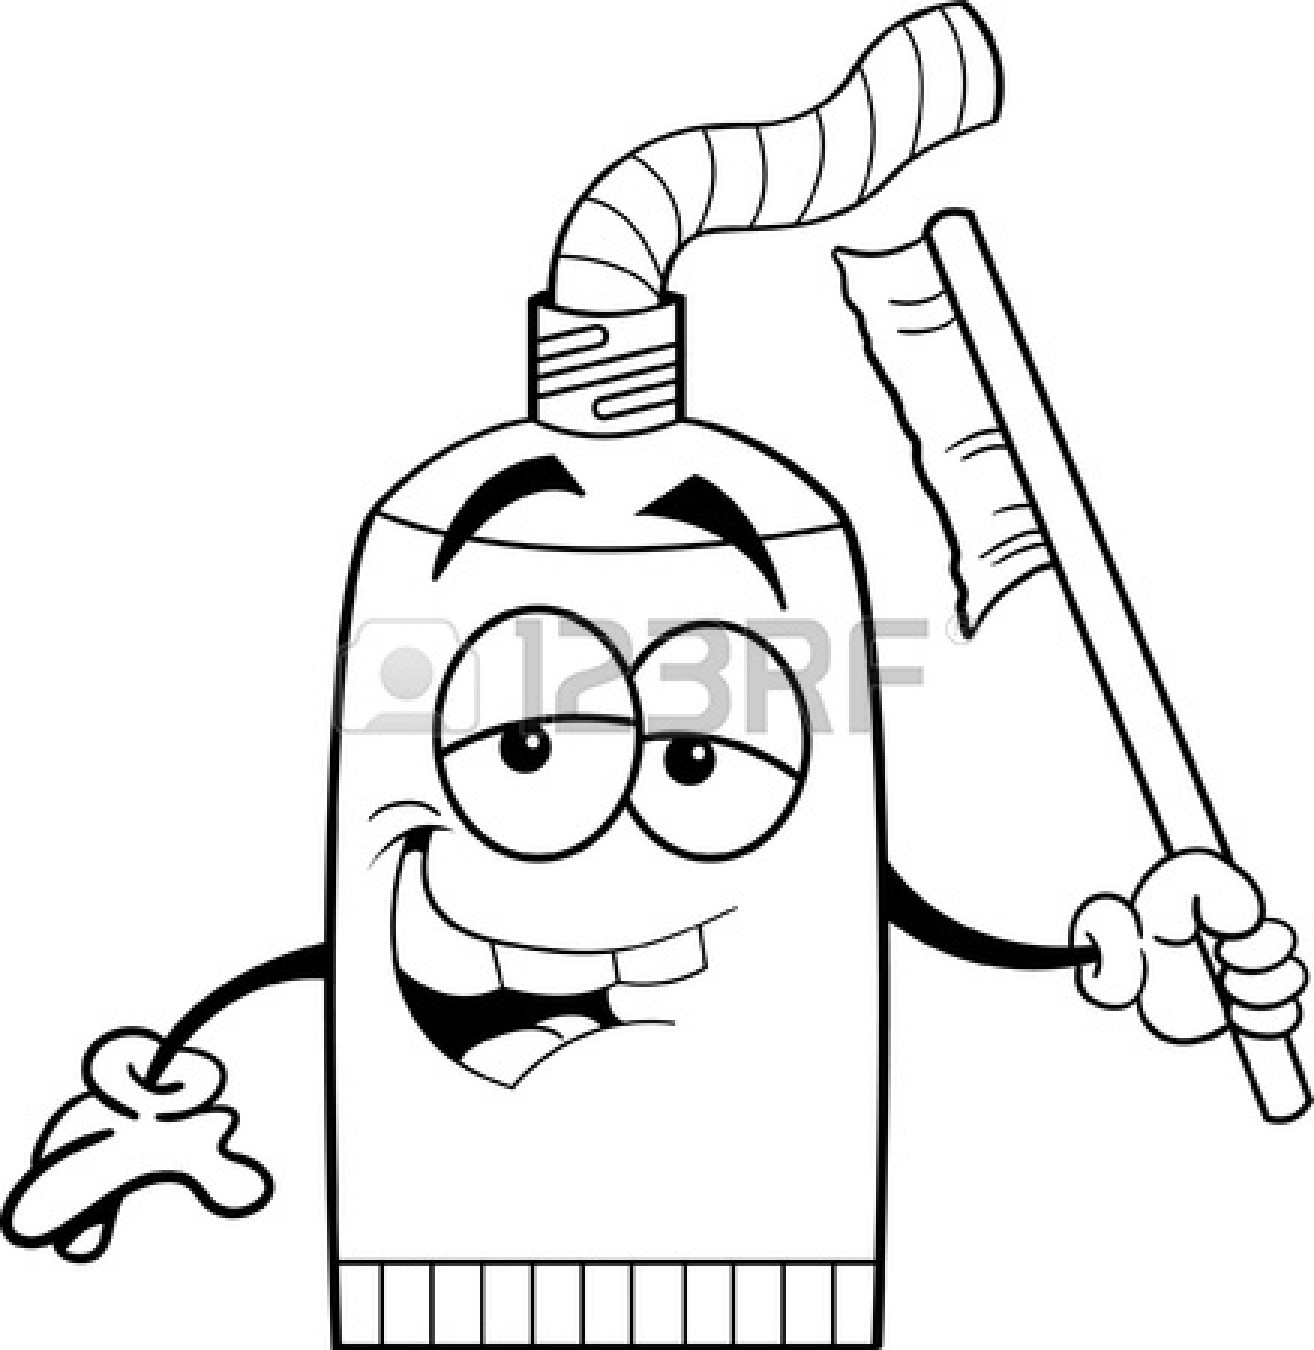 Toothbrush Clipart Black And White 18834625 Black And White